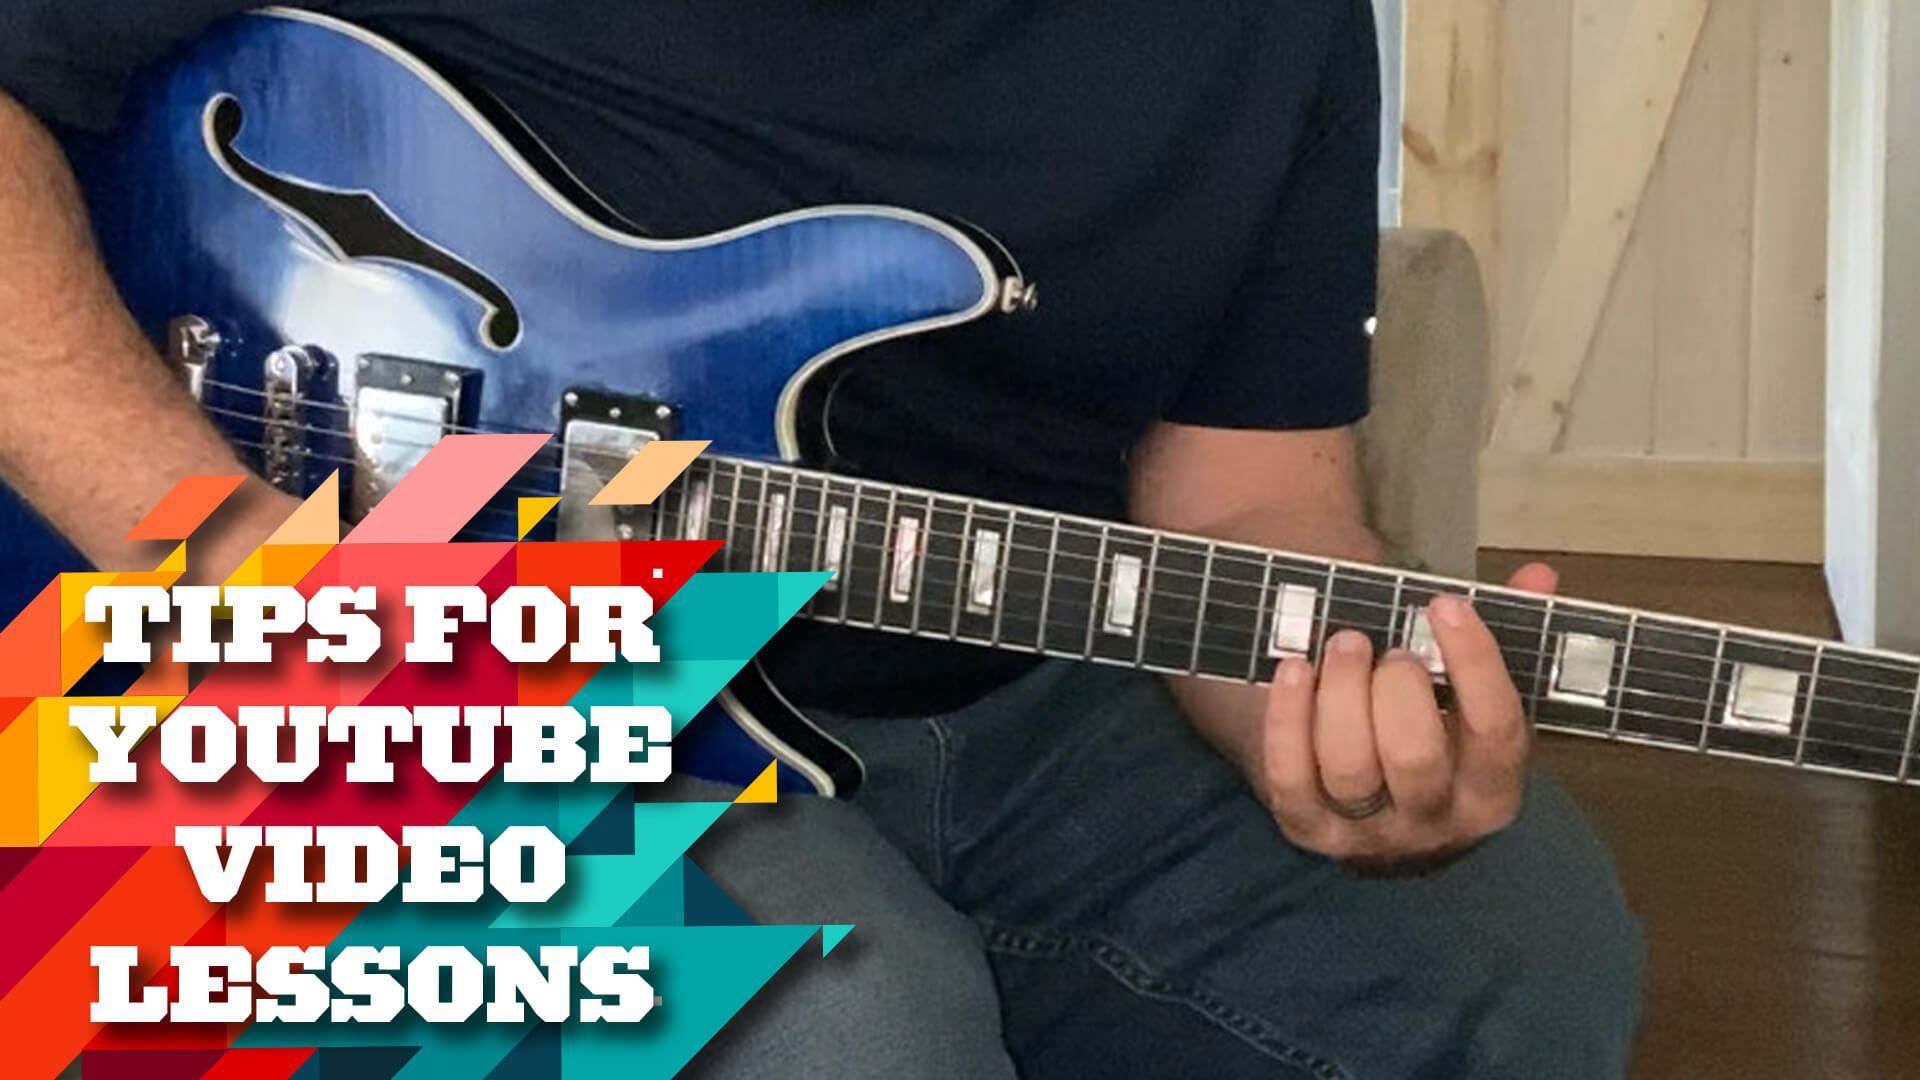 The Do’s and Don’ts of Teaching YouTube Music Lessons